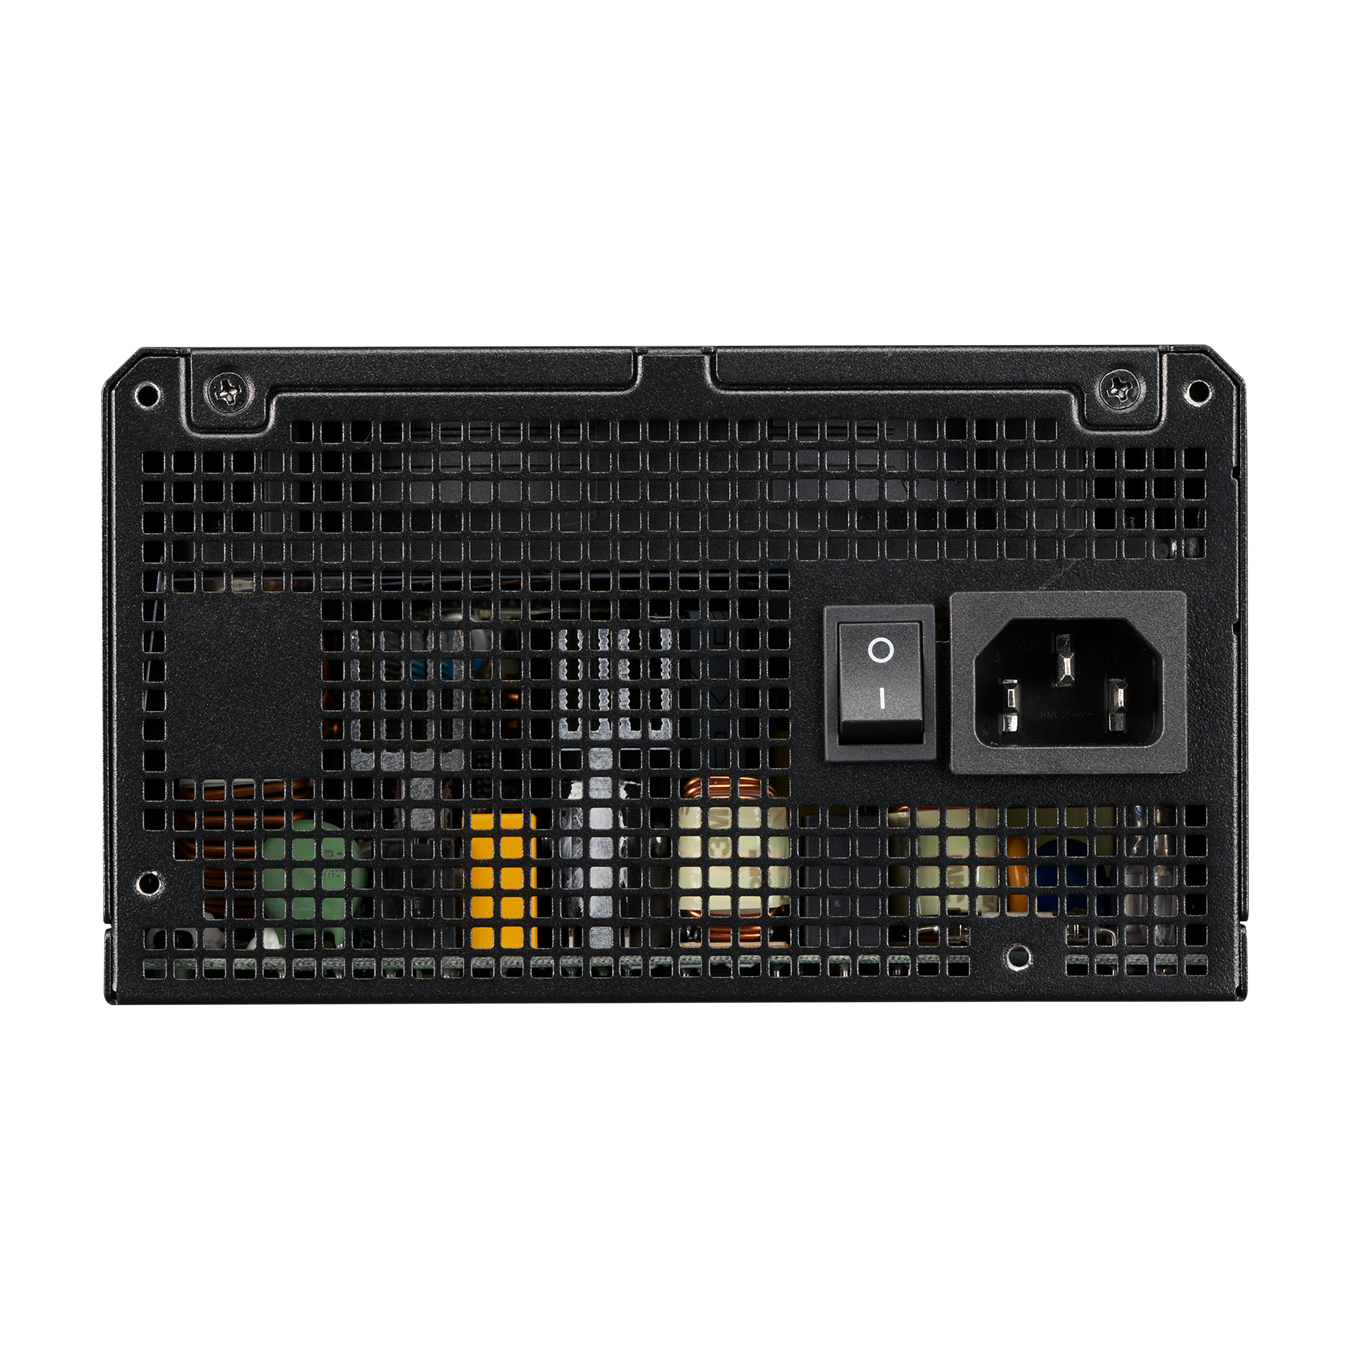 V850 Gold I - The digital platform connects directly to the motherboard via included USB 3.0 wire, allowing software based performance monitoring and customization.